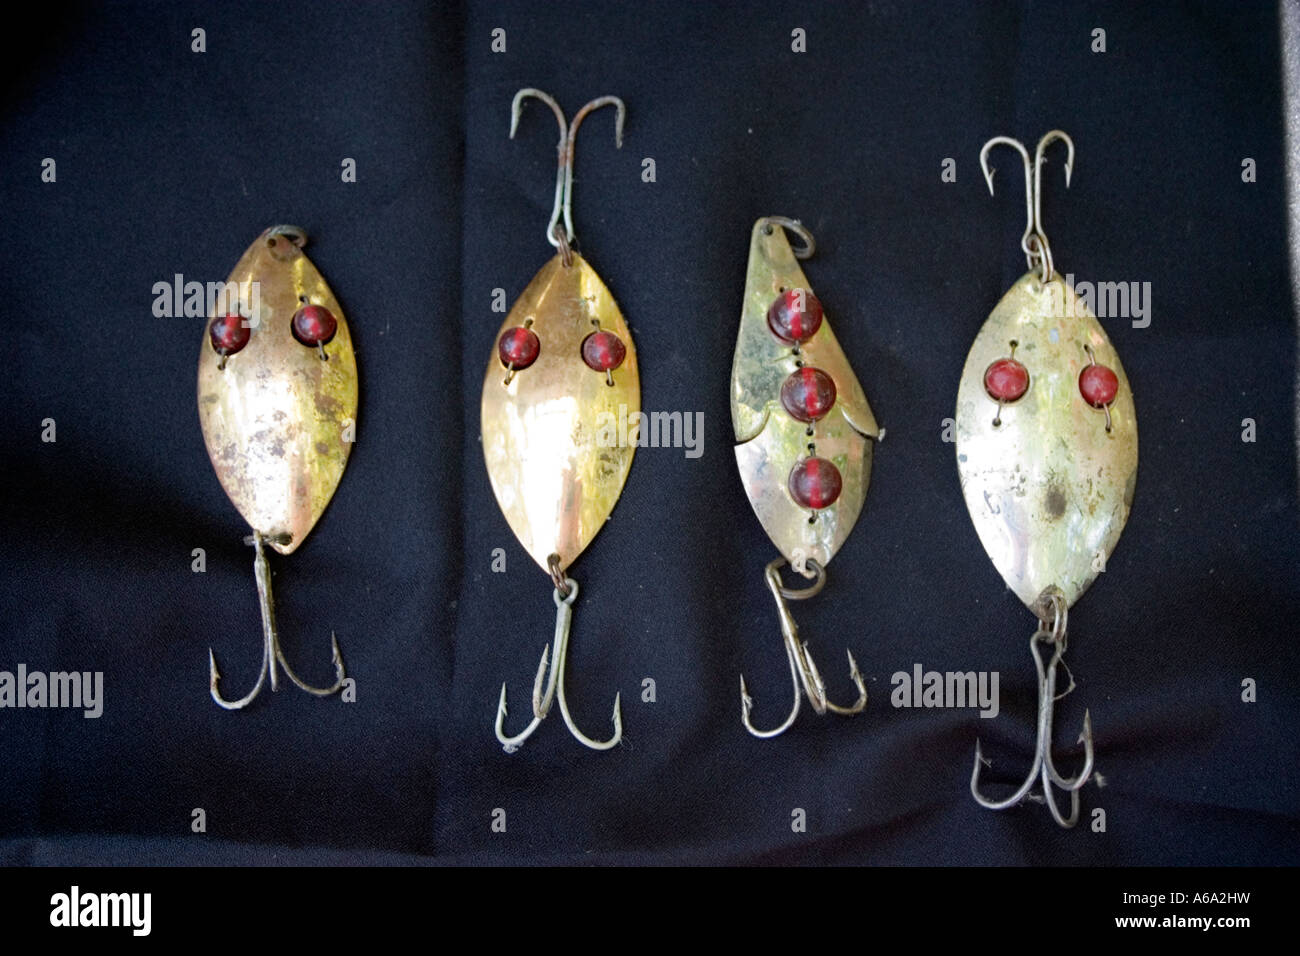 https://c8.alamy.com/comp/A6A2HW/antique-gold-spoon-red-jeweled-eyed-fishing-lures-clitherall-minnesota-A6A2HW.jpg